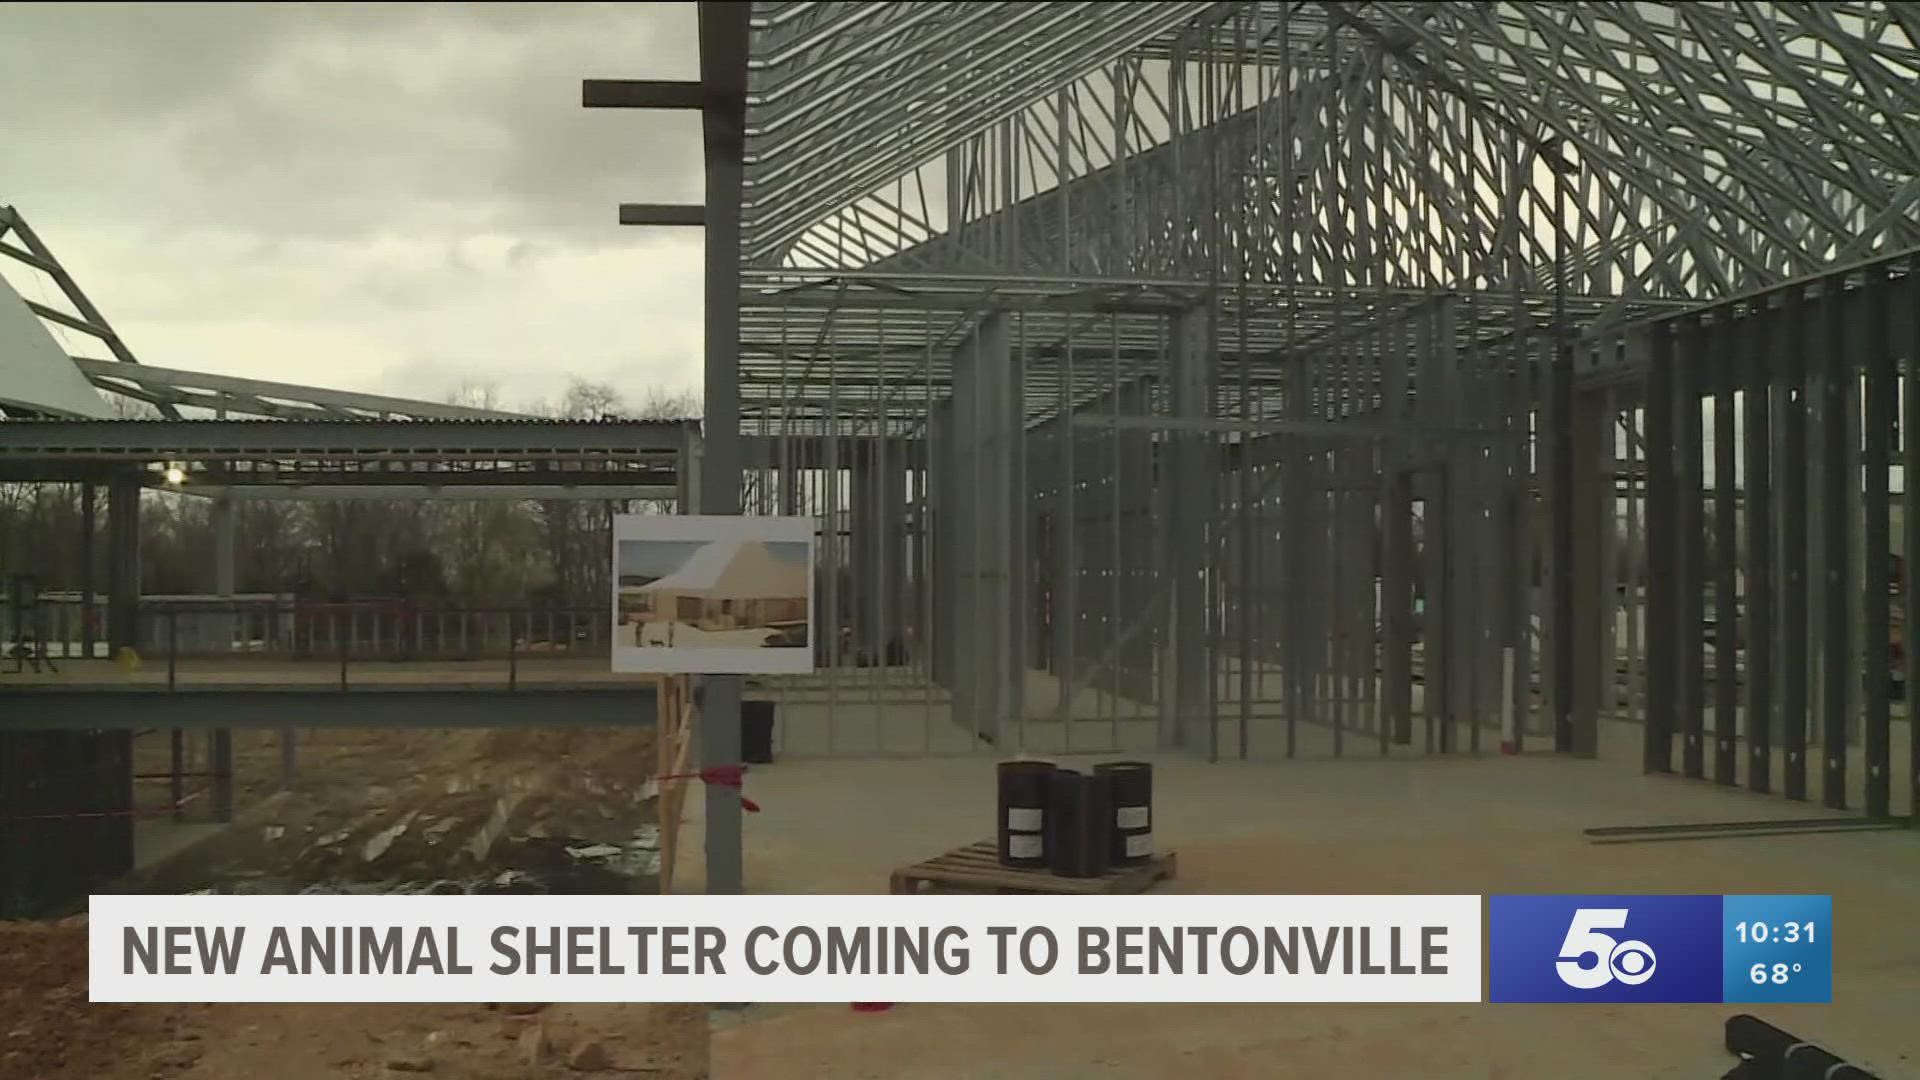 The Best Friends Pet Resource Center is currently under construction in Bentonville and will soon provide many pet resources.